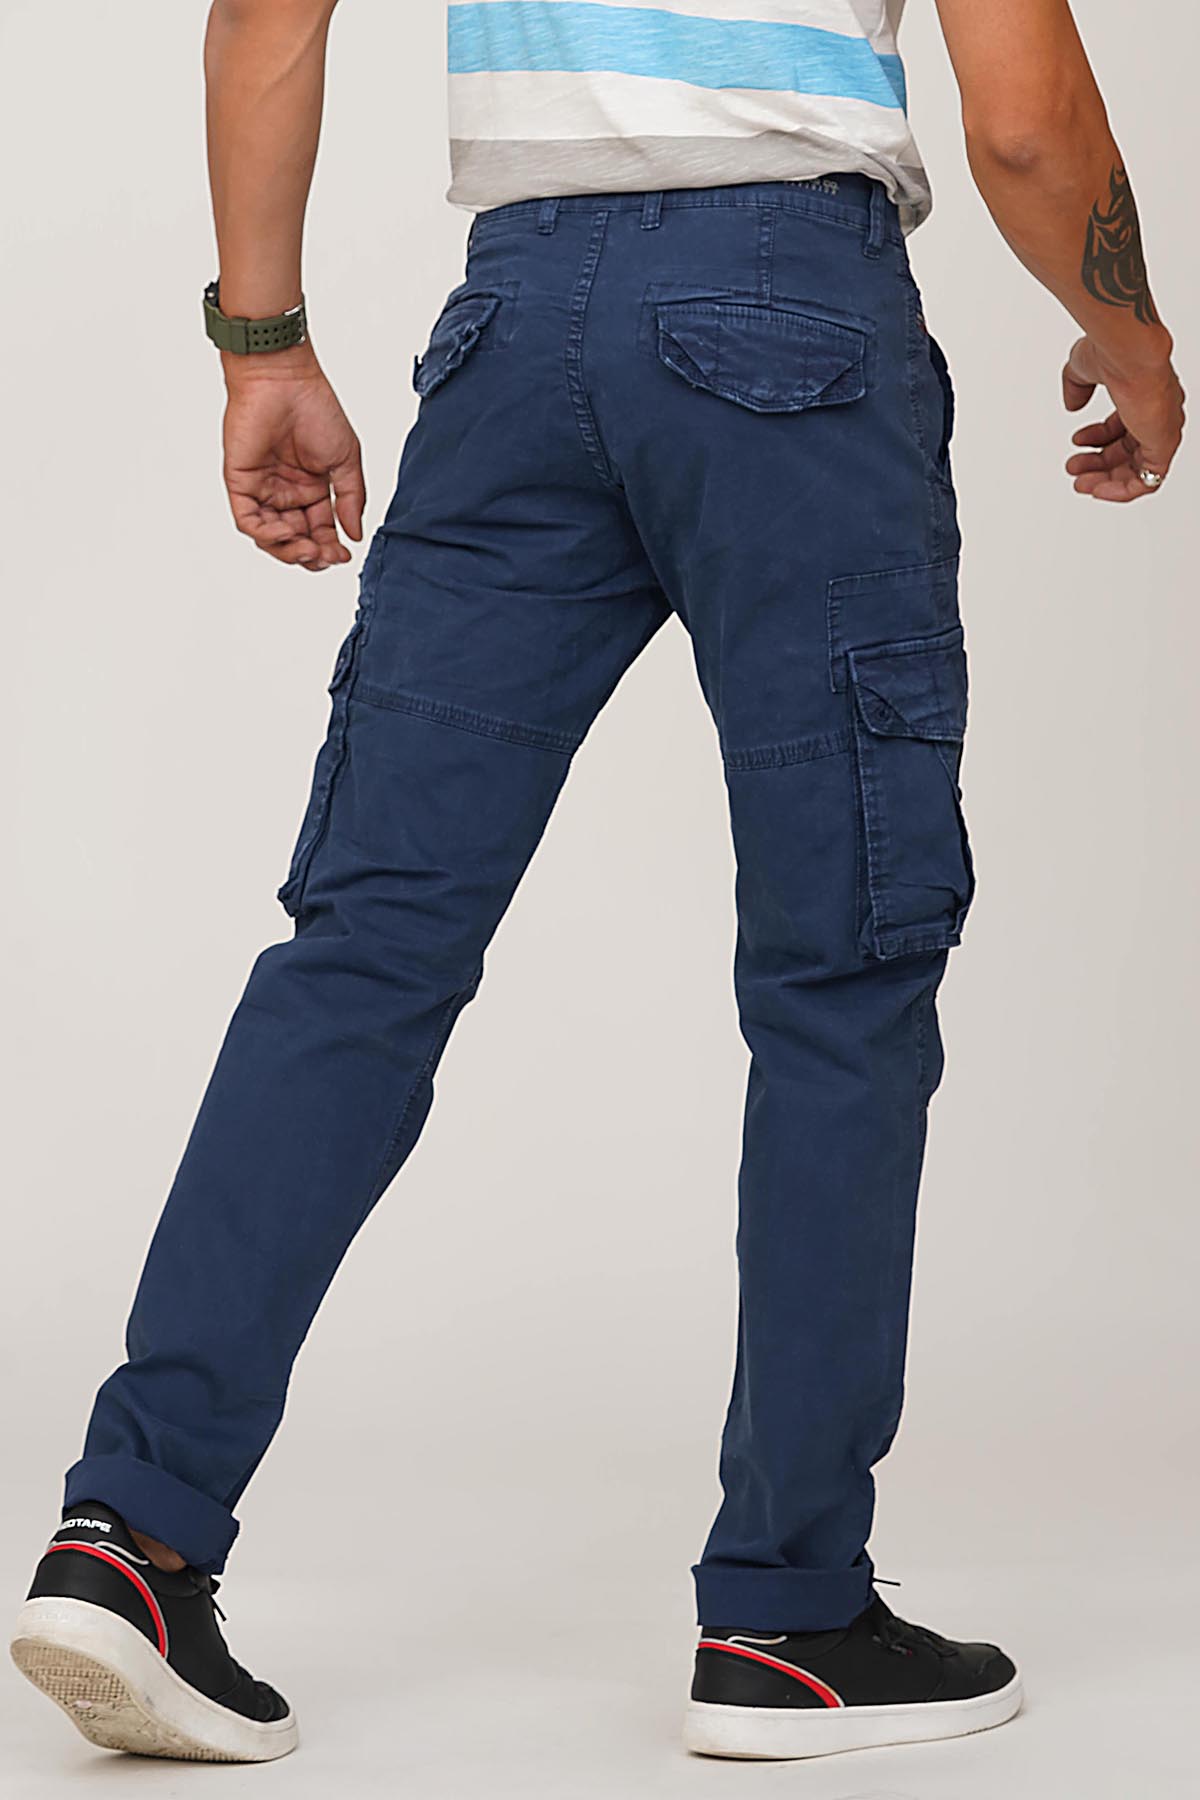 Discover more than 72 fitted cargo pants super hot - in.eteachers